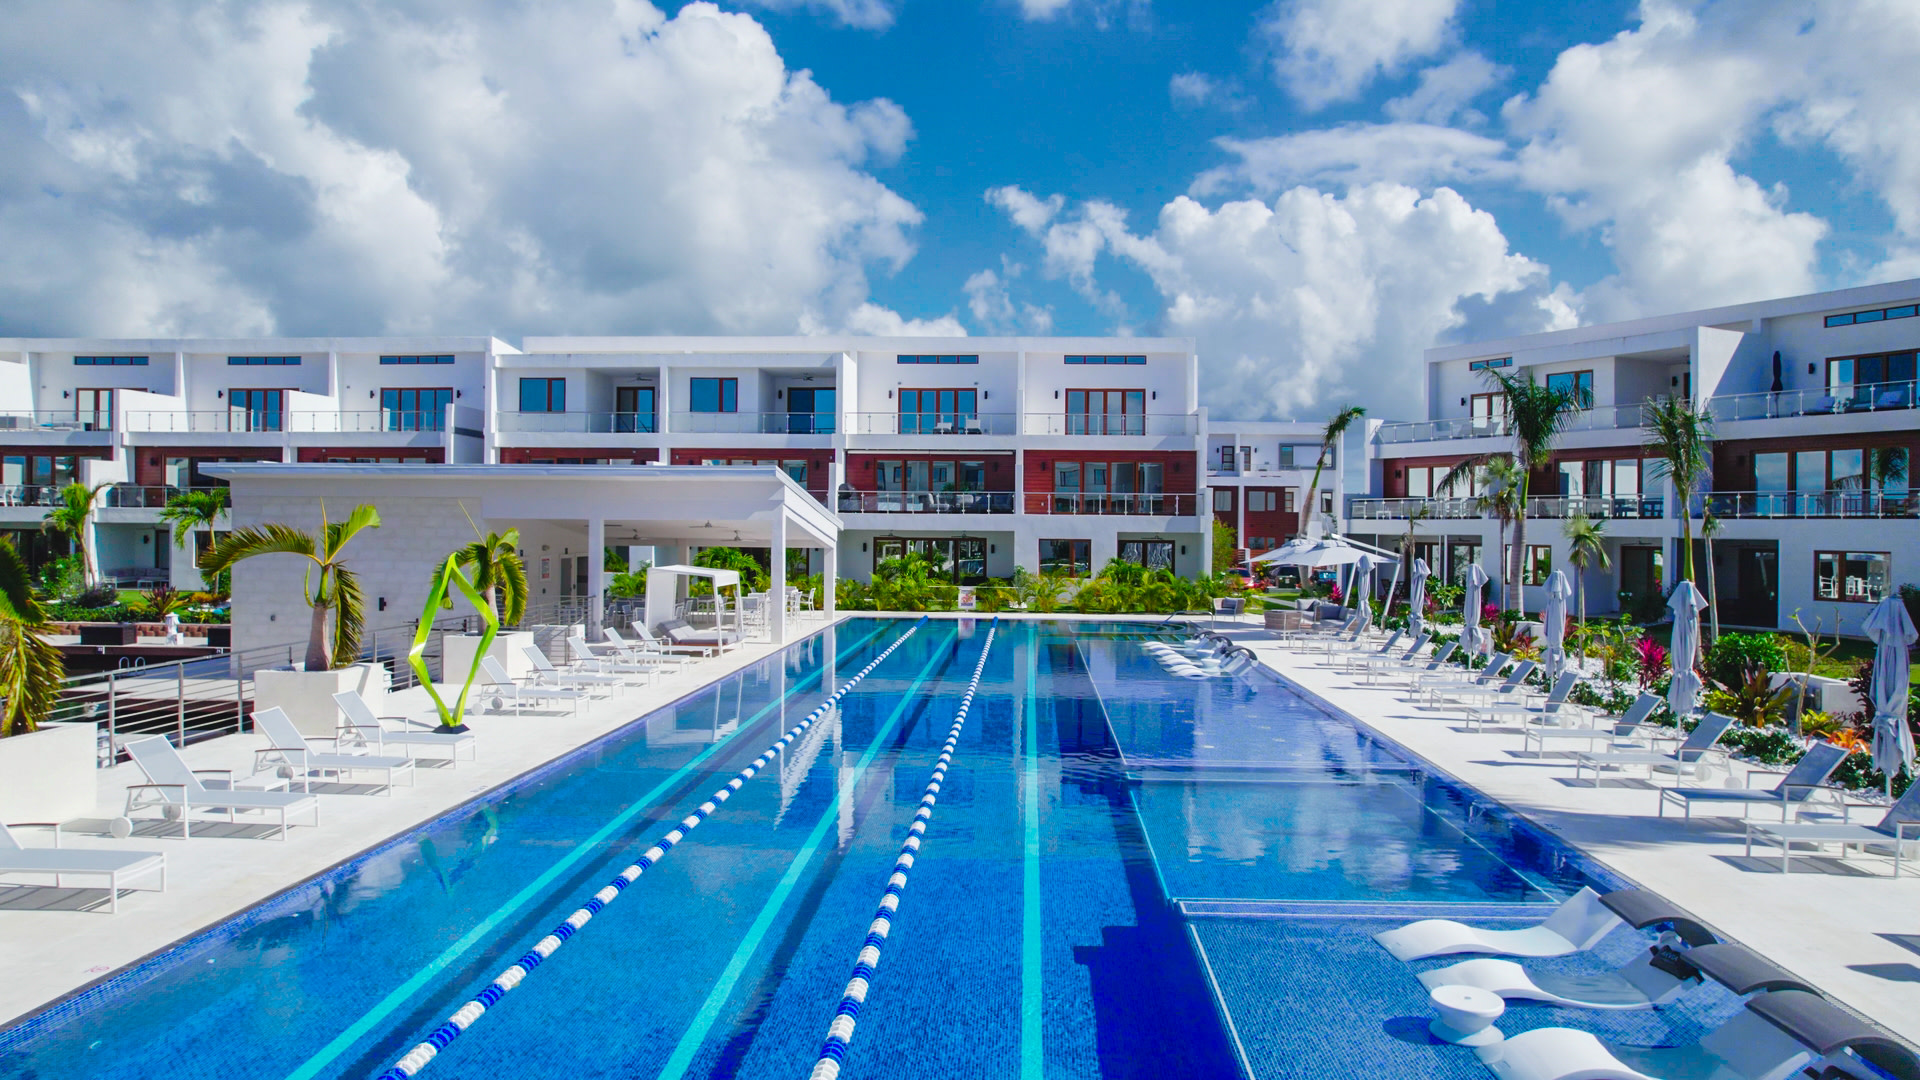 Arvia Townhomes on the Canal in Grand Harbour, Cayman Islands